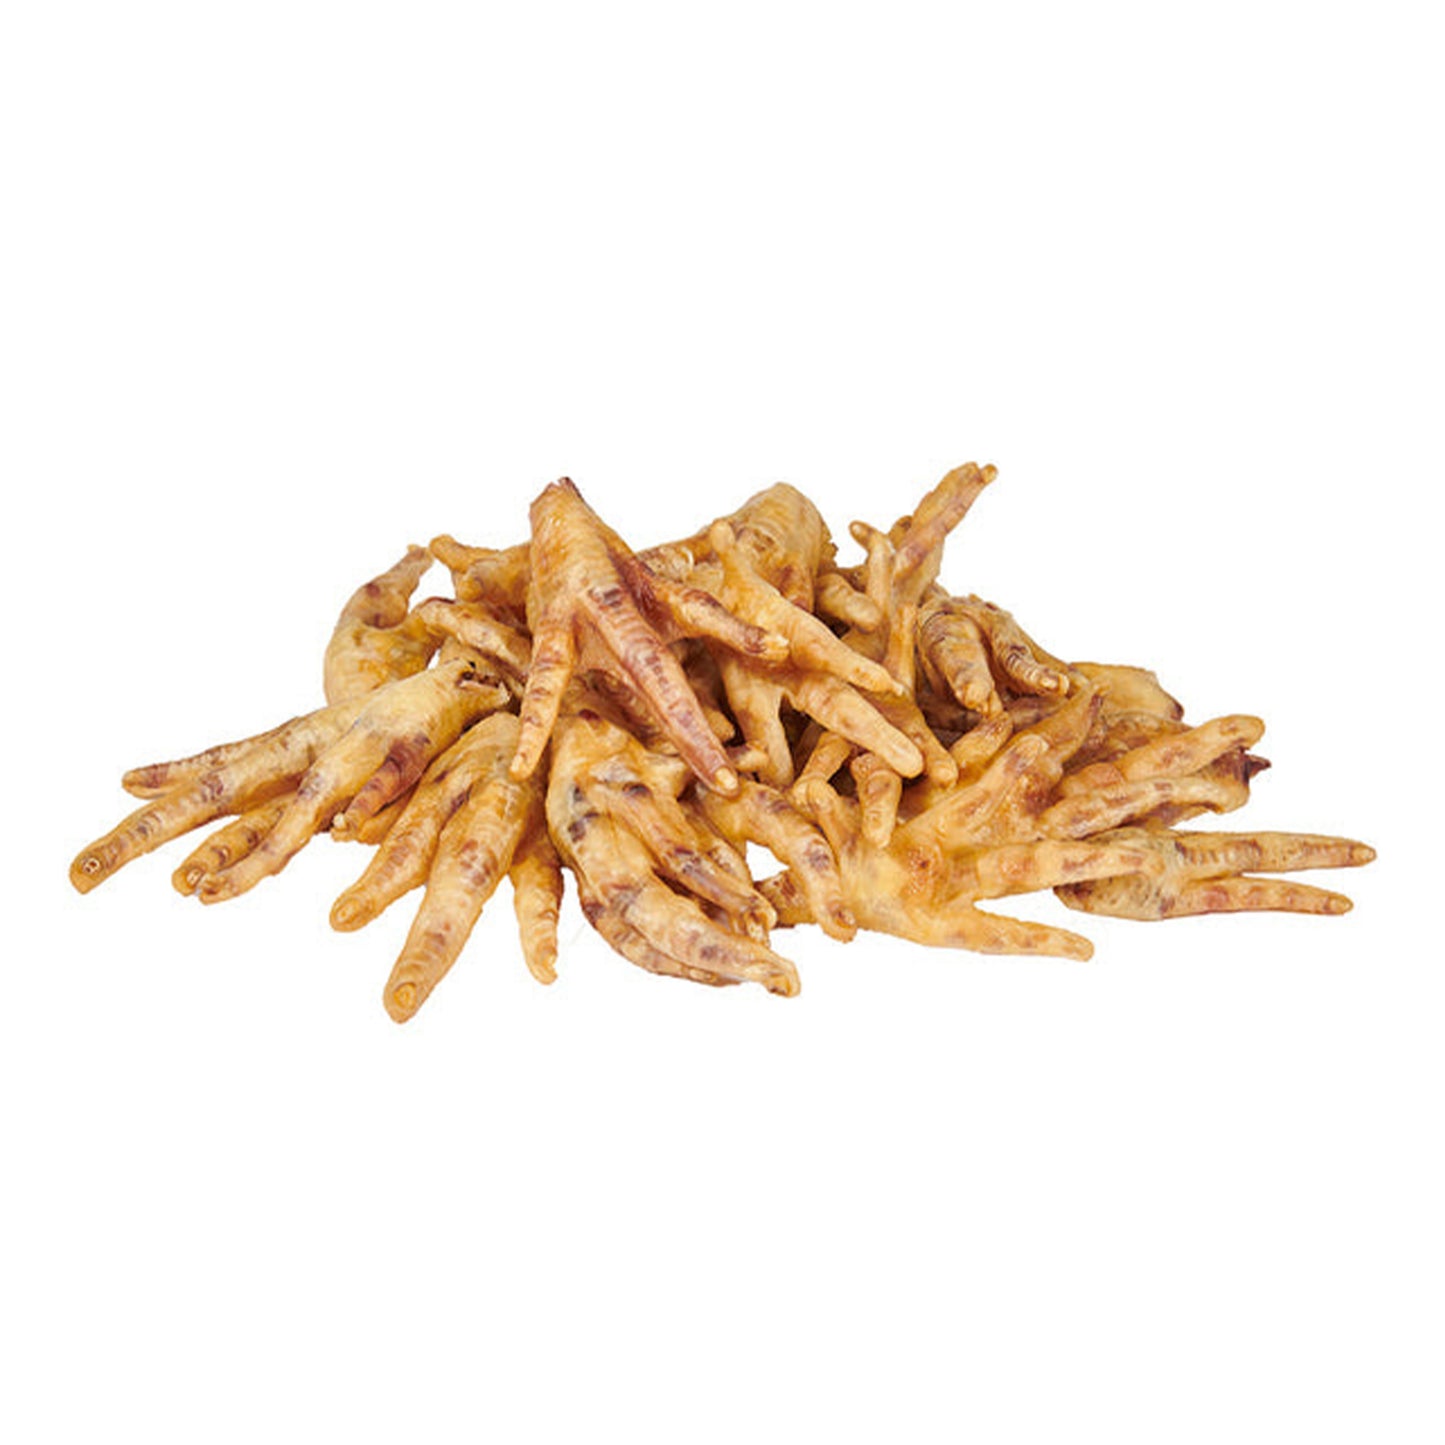 Buy Dehydrated Chicken Feet - Tasty and Natural Dog Treats for Happy Pets